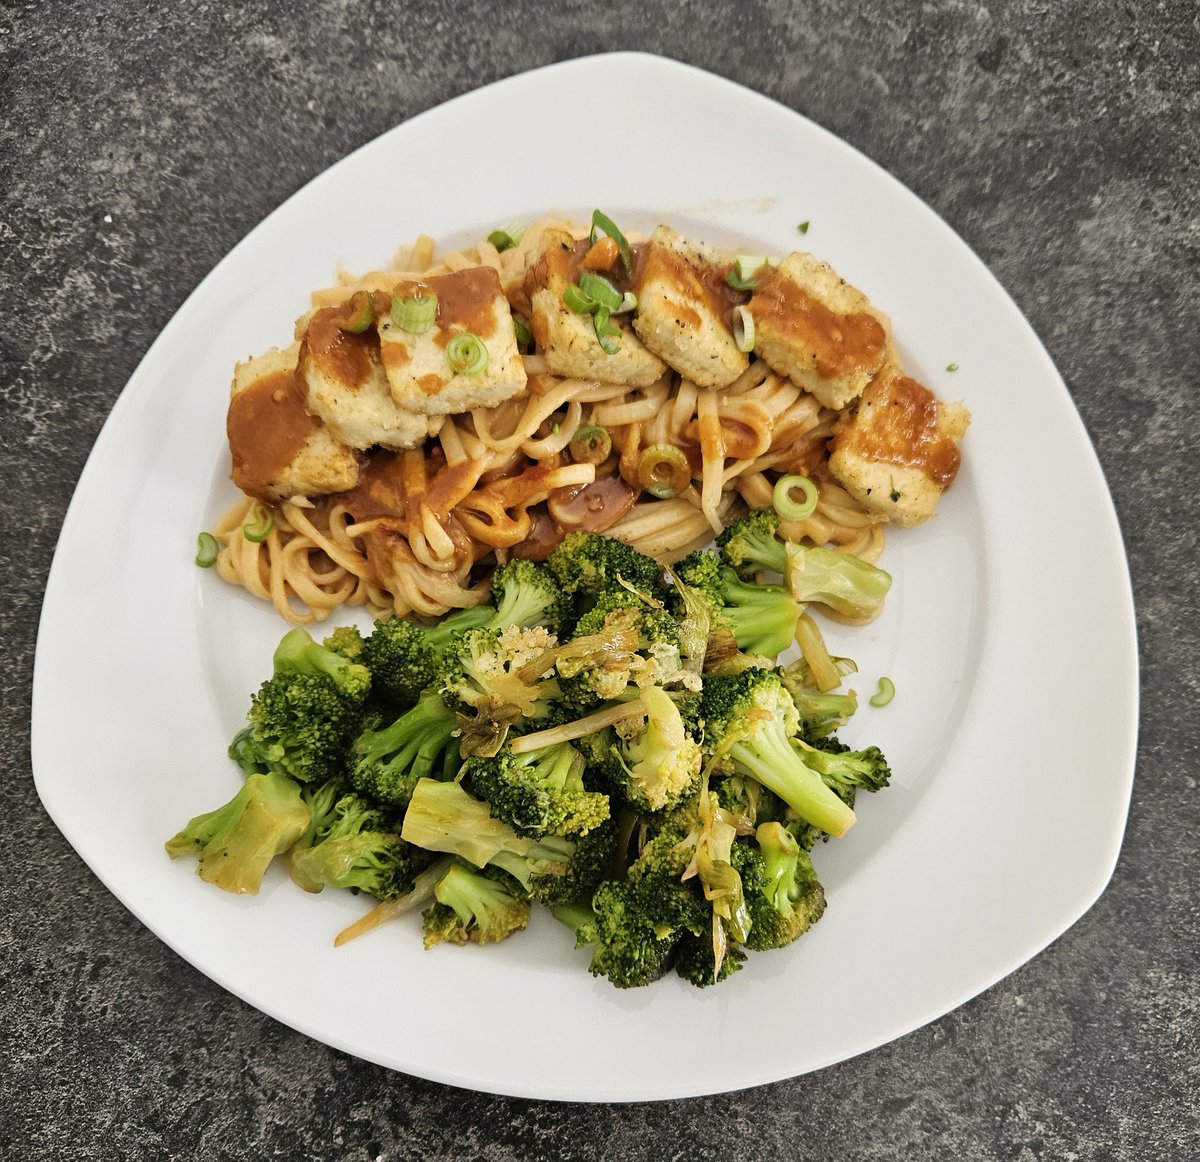 Mahlzeit ‼️

Noodles with Peanut Sauce,  Broccoli and Tofu 

#veganfood #vegan #foodblog #foodblogger #twittersupperclub #foodphotography